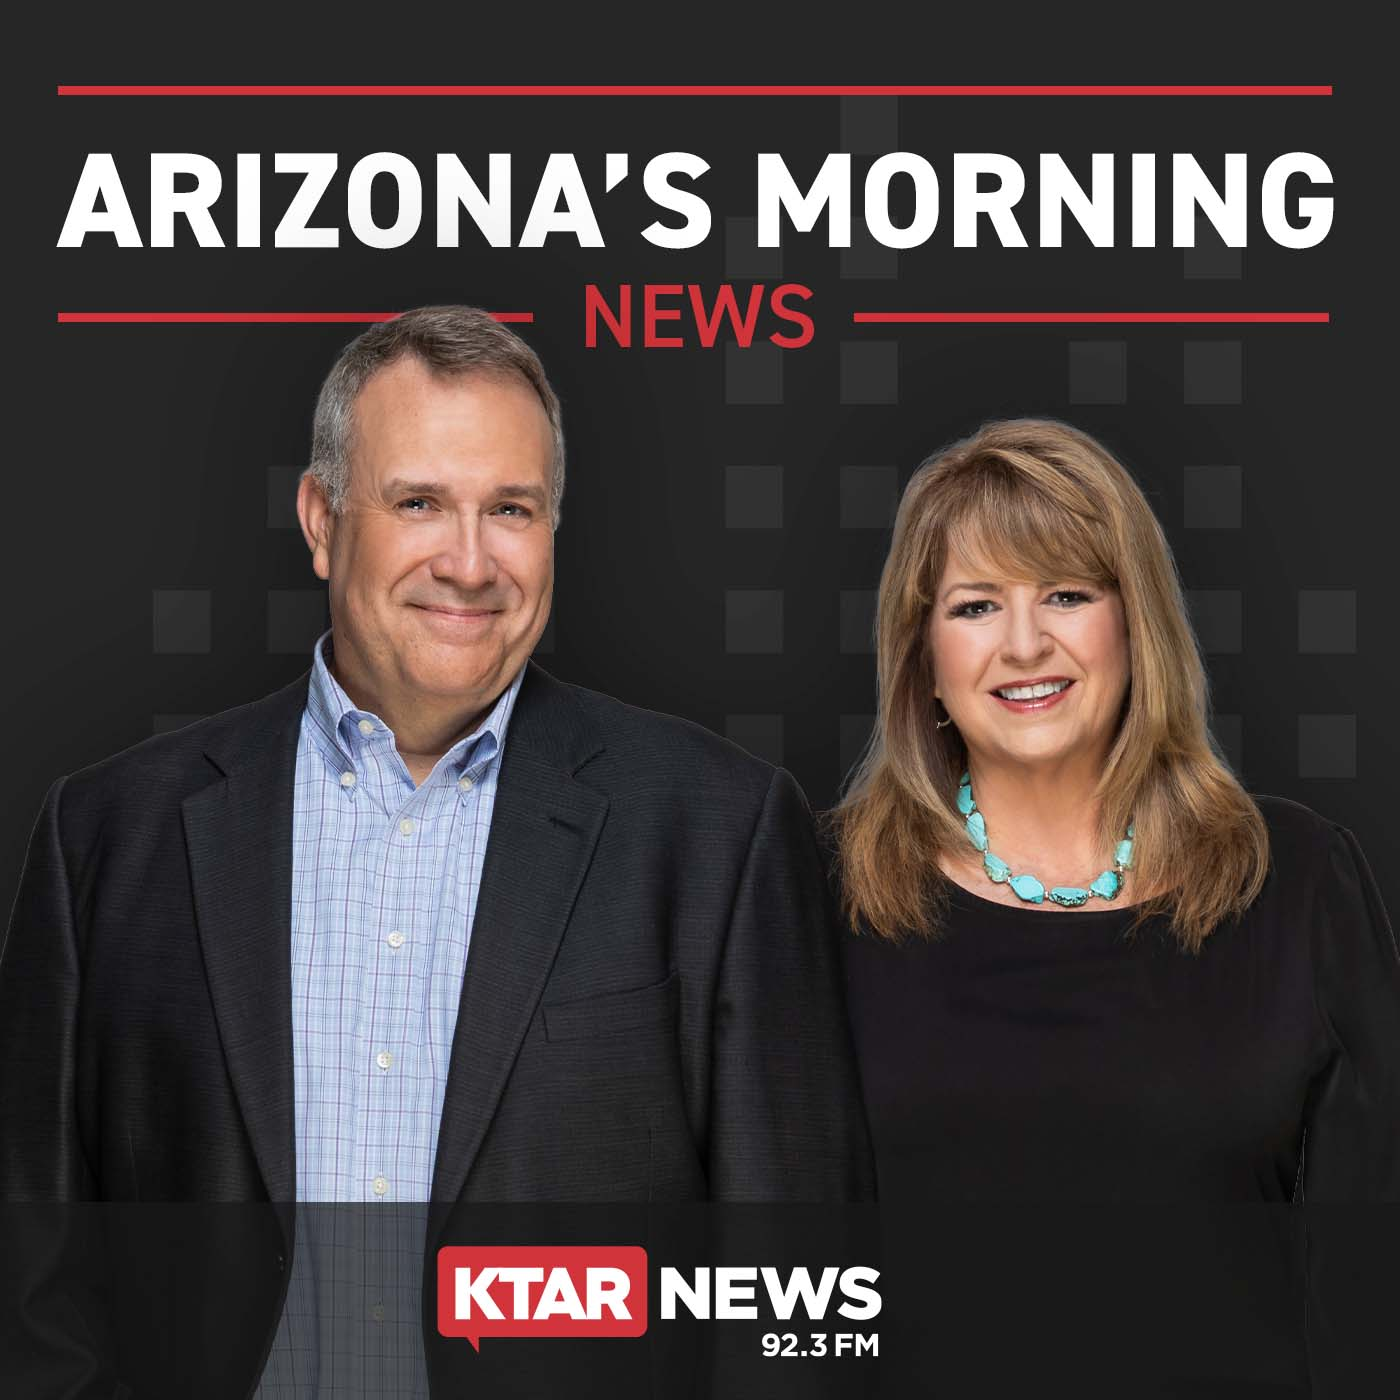 Jim's SharperPoint Commentary: Arizona farmers' options dry up